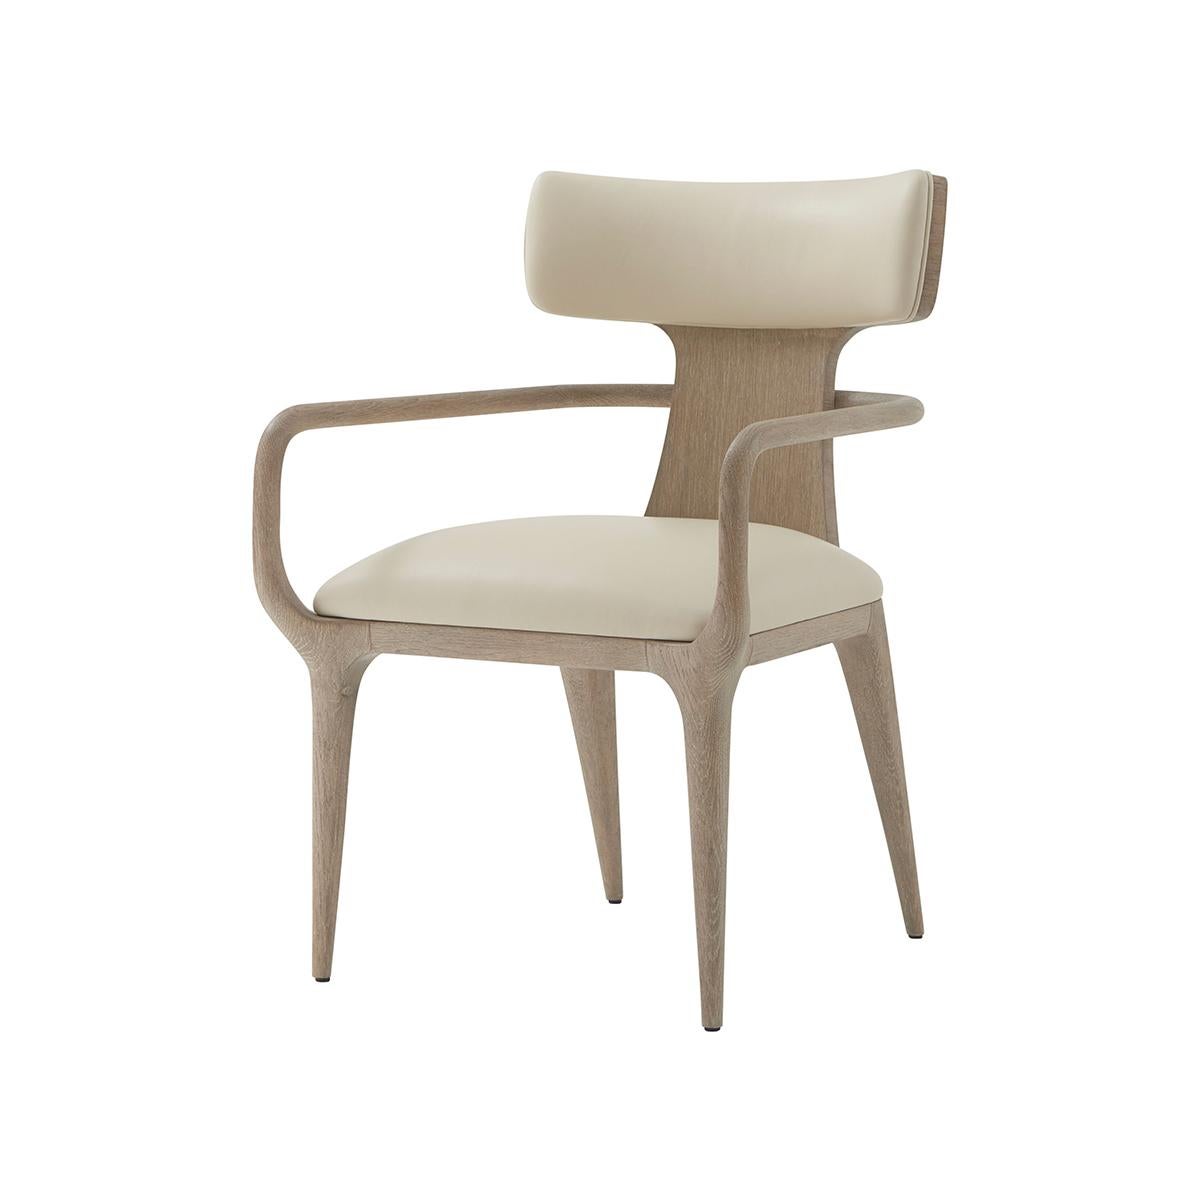 The upholstered dining armchair features a subtle Scandinavian design with a twist on the traditional high-backed design, which makes it unique to your home. Its clean naturally tapered lines of the legs support a plush medium firm density cushioned